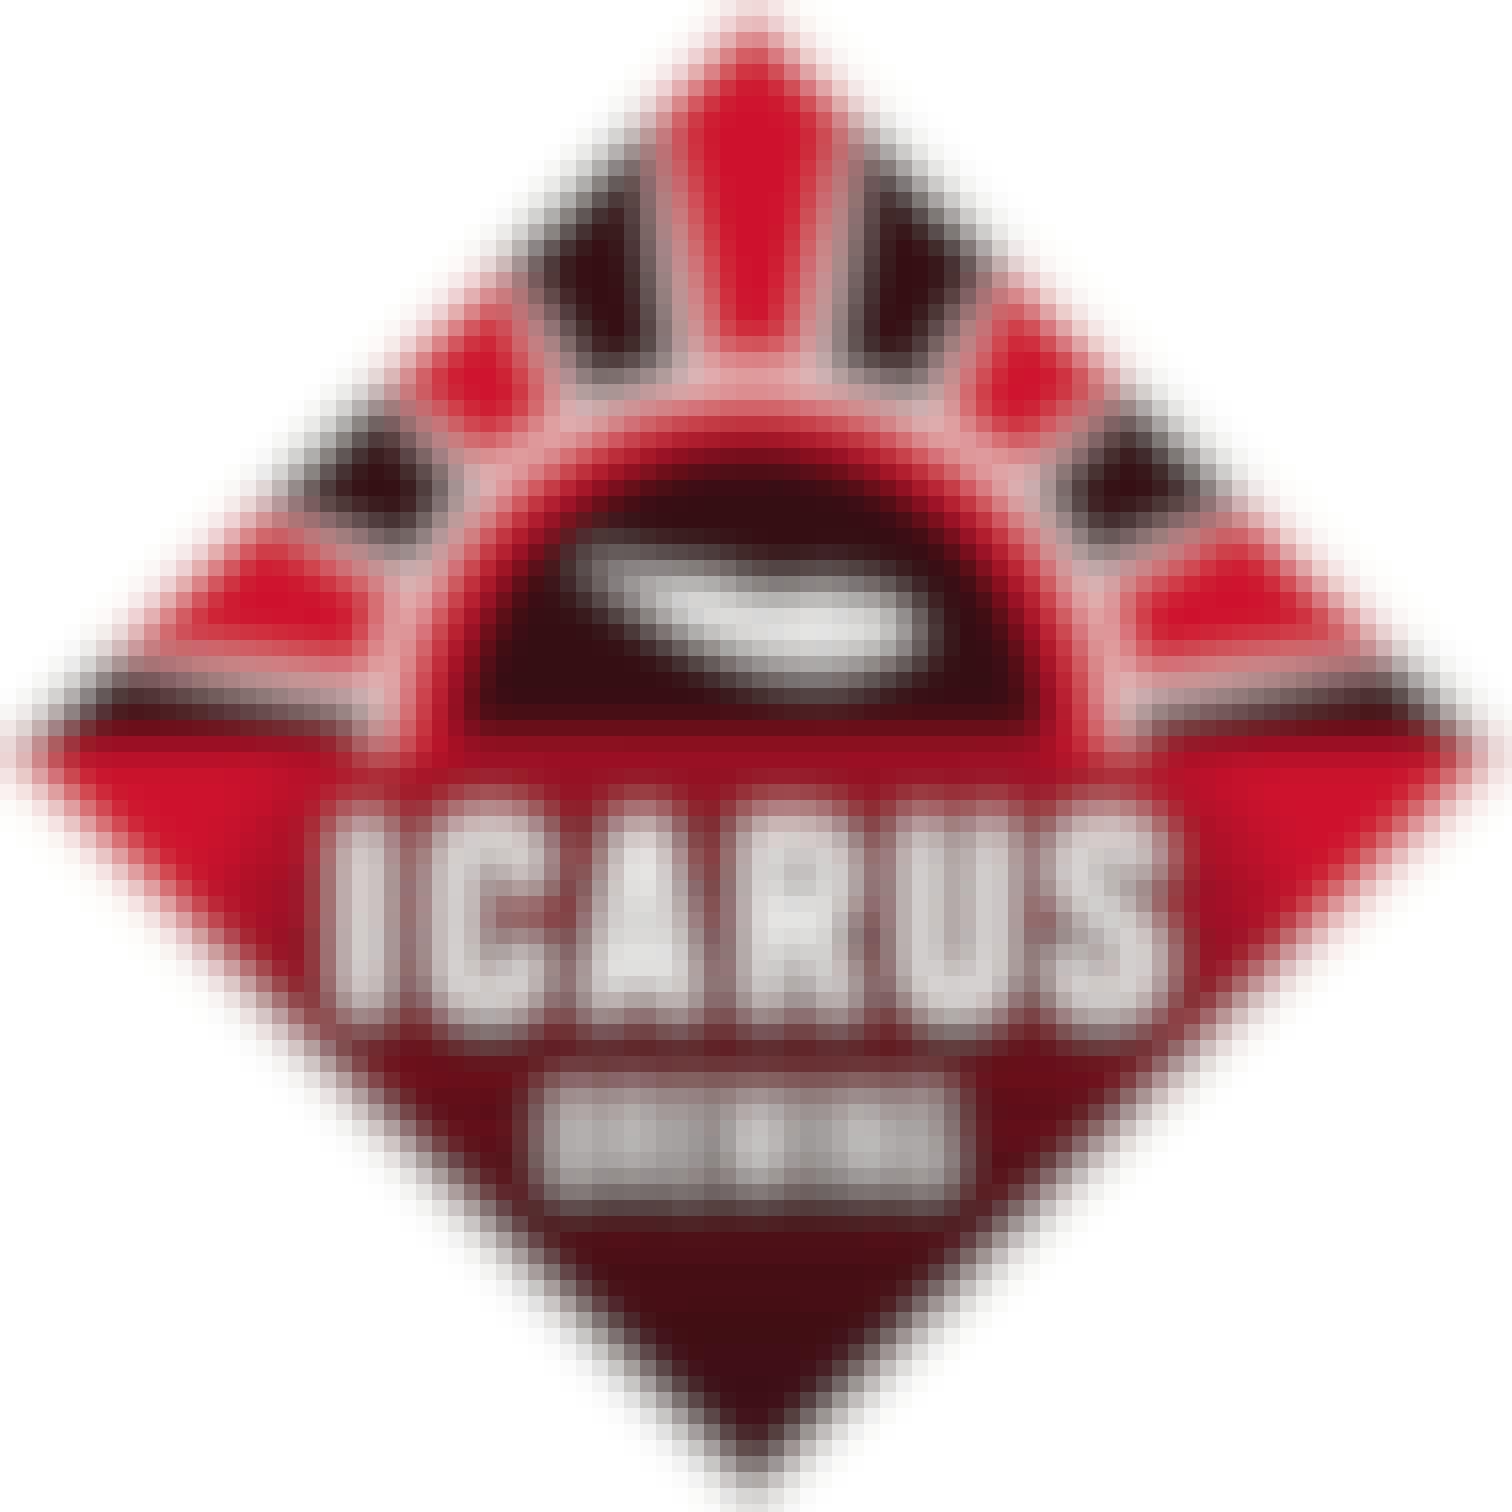 Icarus Brewing Drinking Rhubarb Pie For Breakfast 4 pack 16 oz. Can